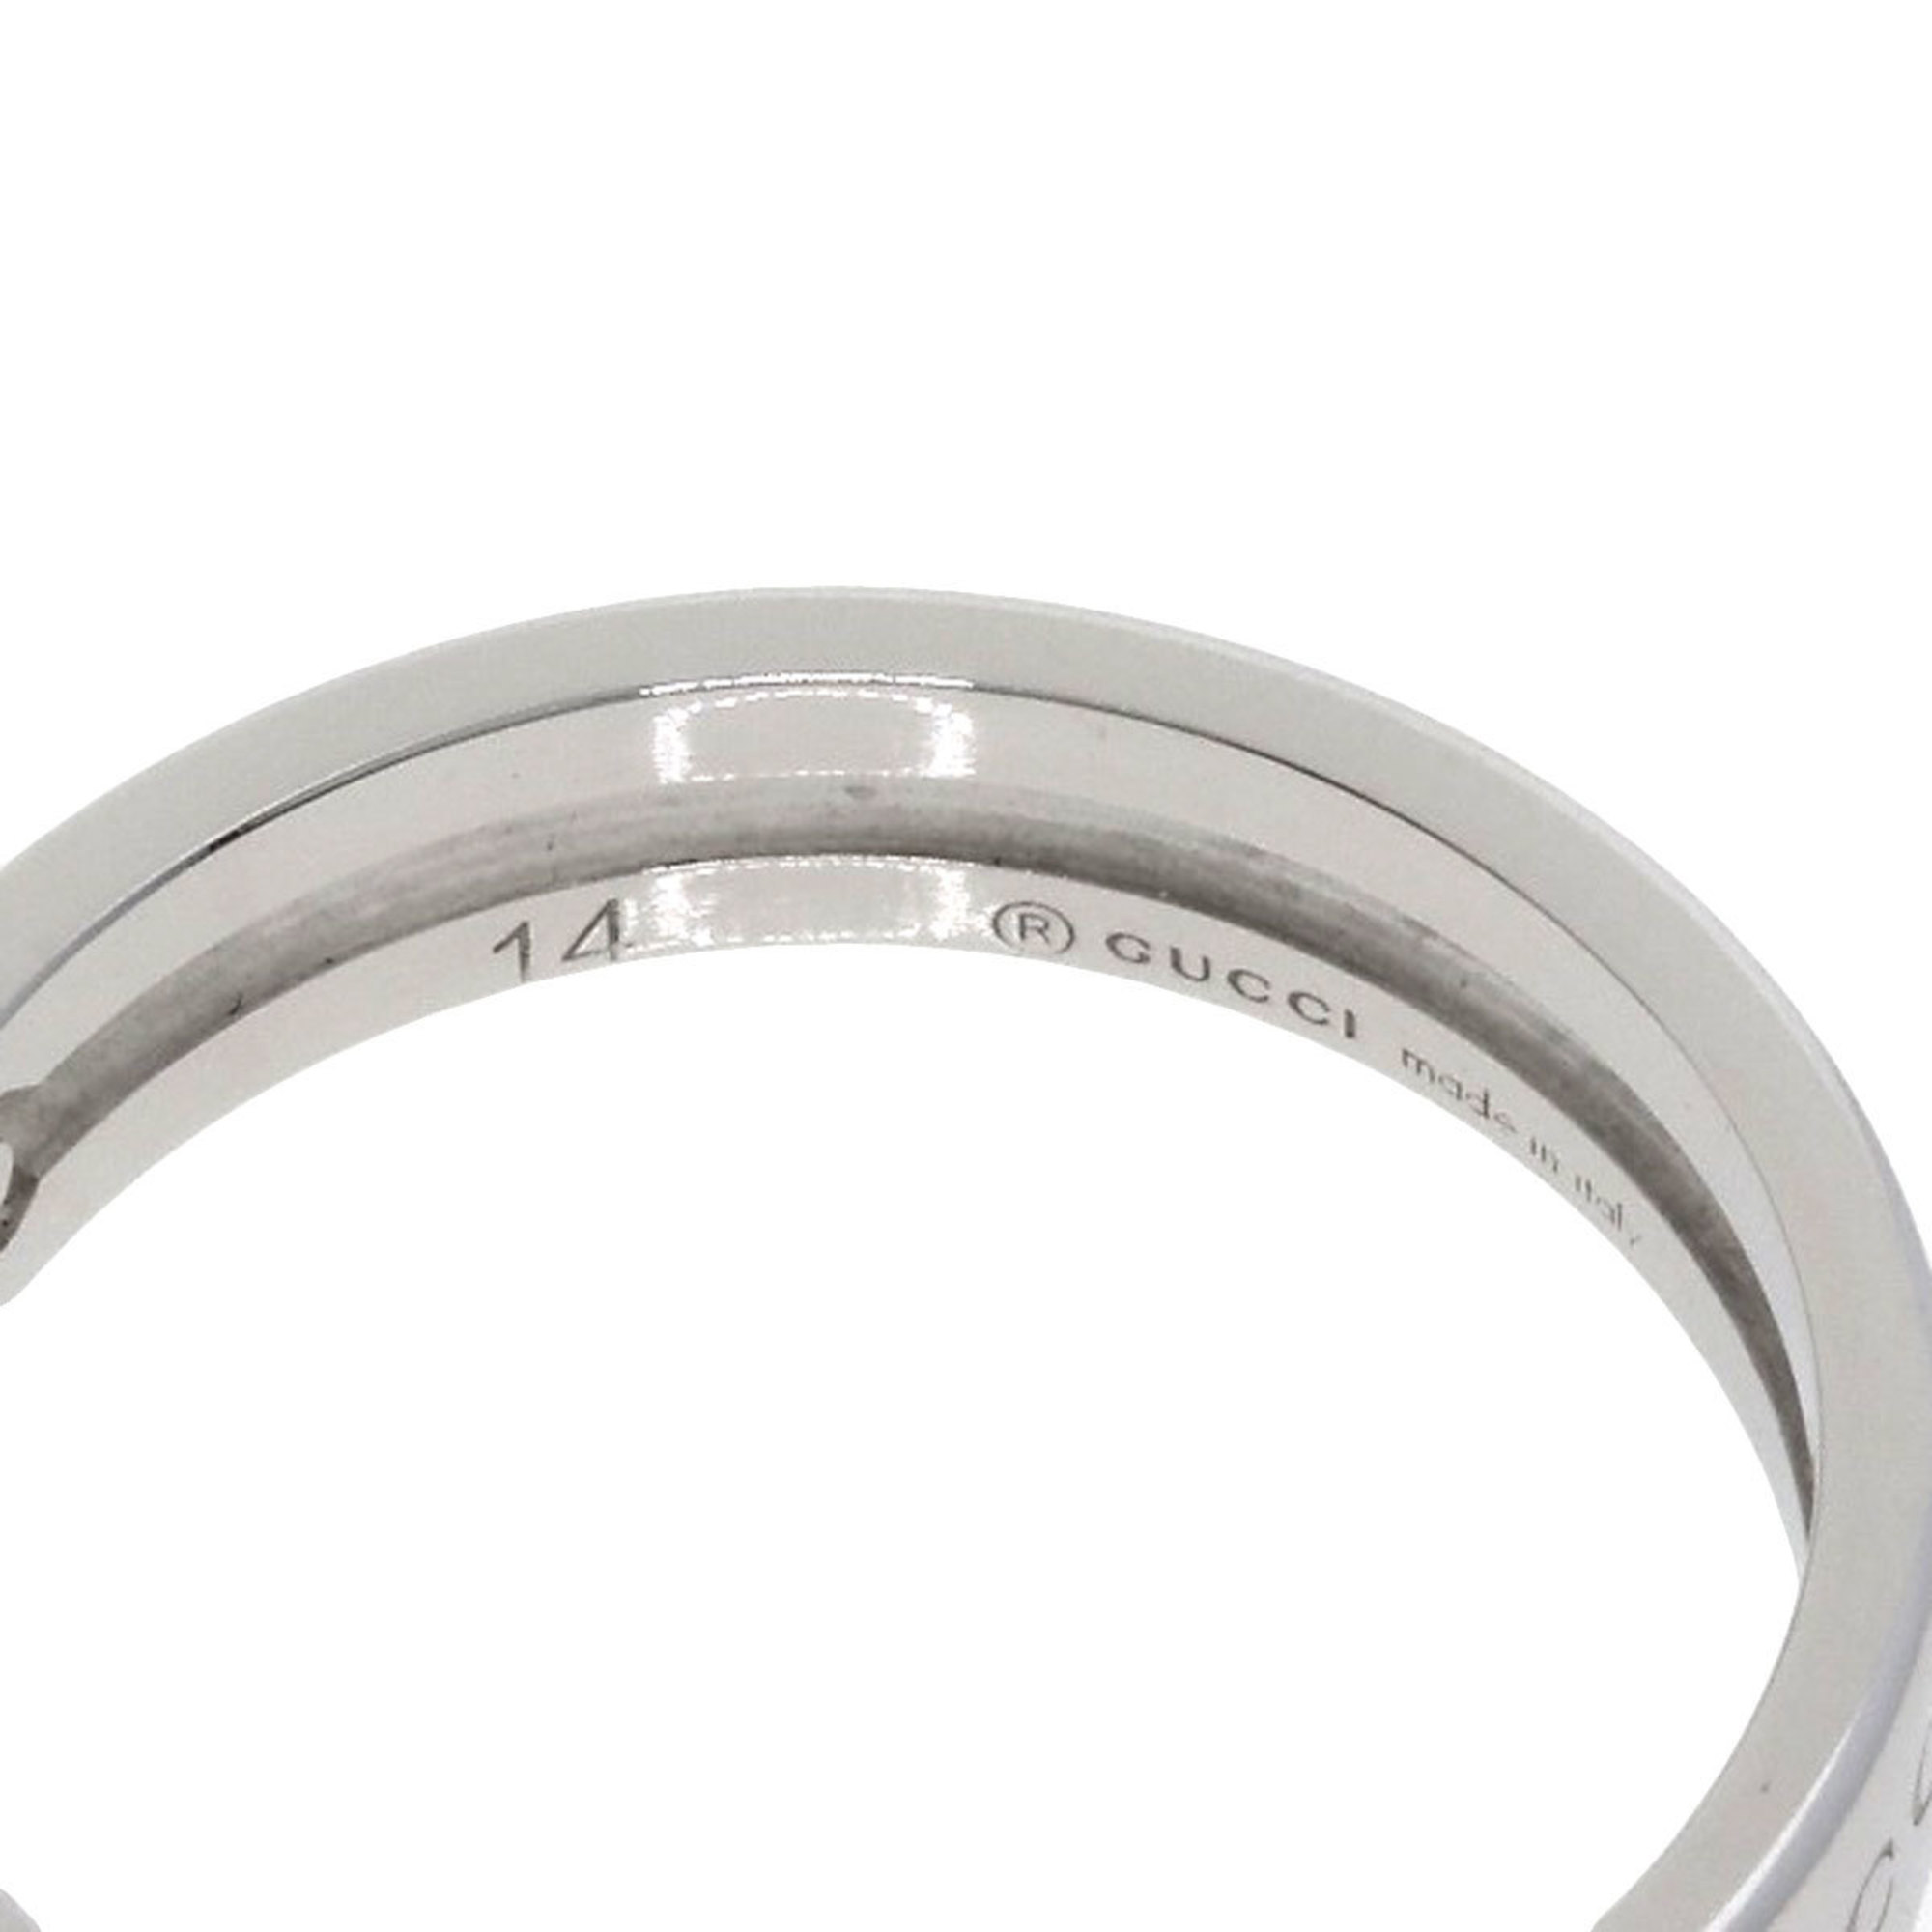 Gucci Infinity #14 Ring, 18K White Gold, Women's, GUCCI